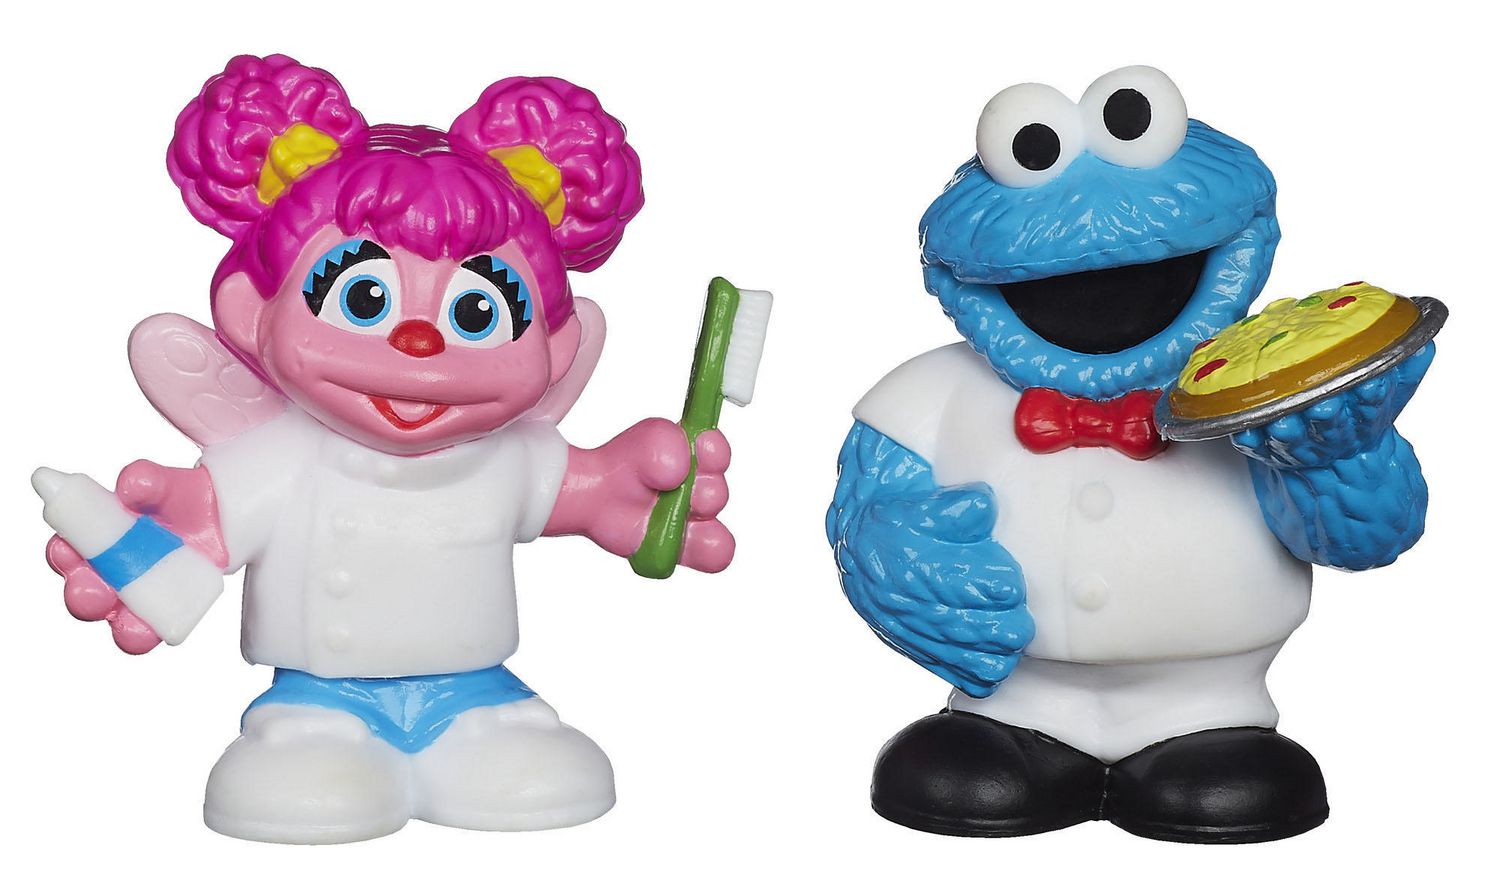 Sesame Street Friends At Work Abby Cadabby And Cookie Monster Figures 